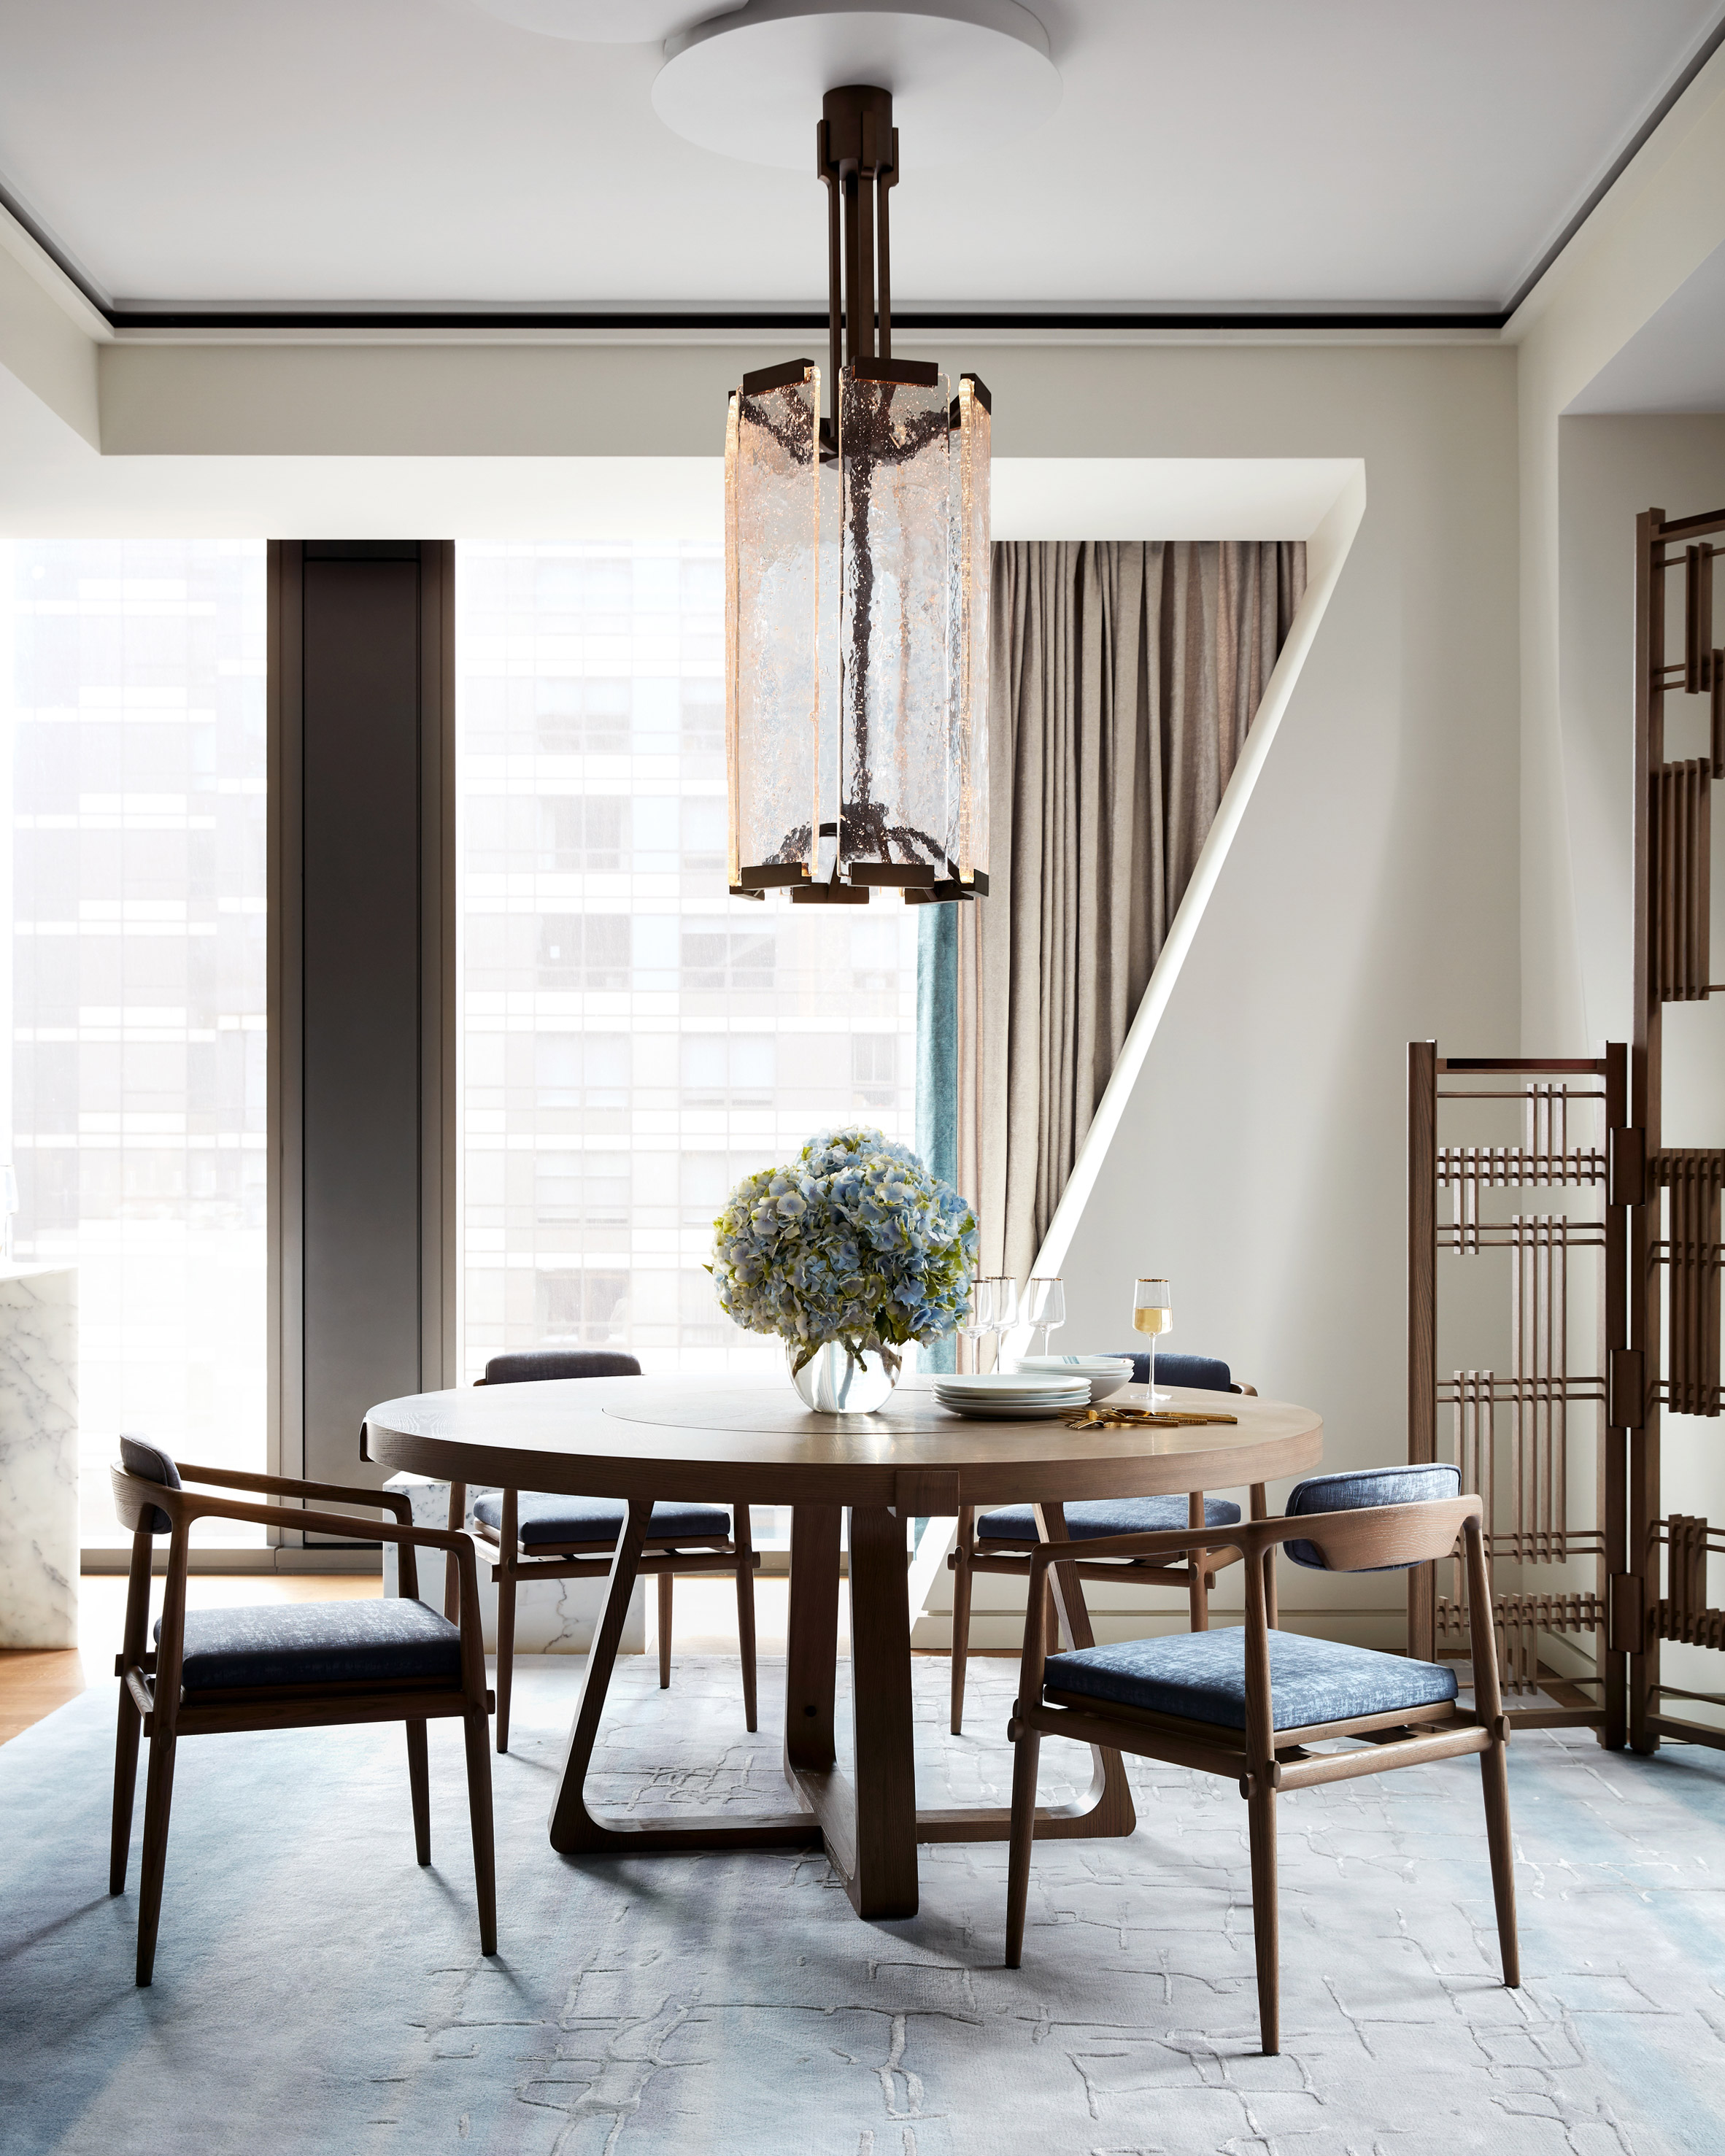 53 West 53 by Andre Fu 36B